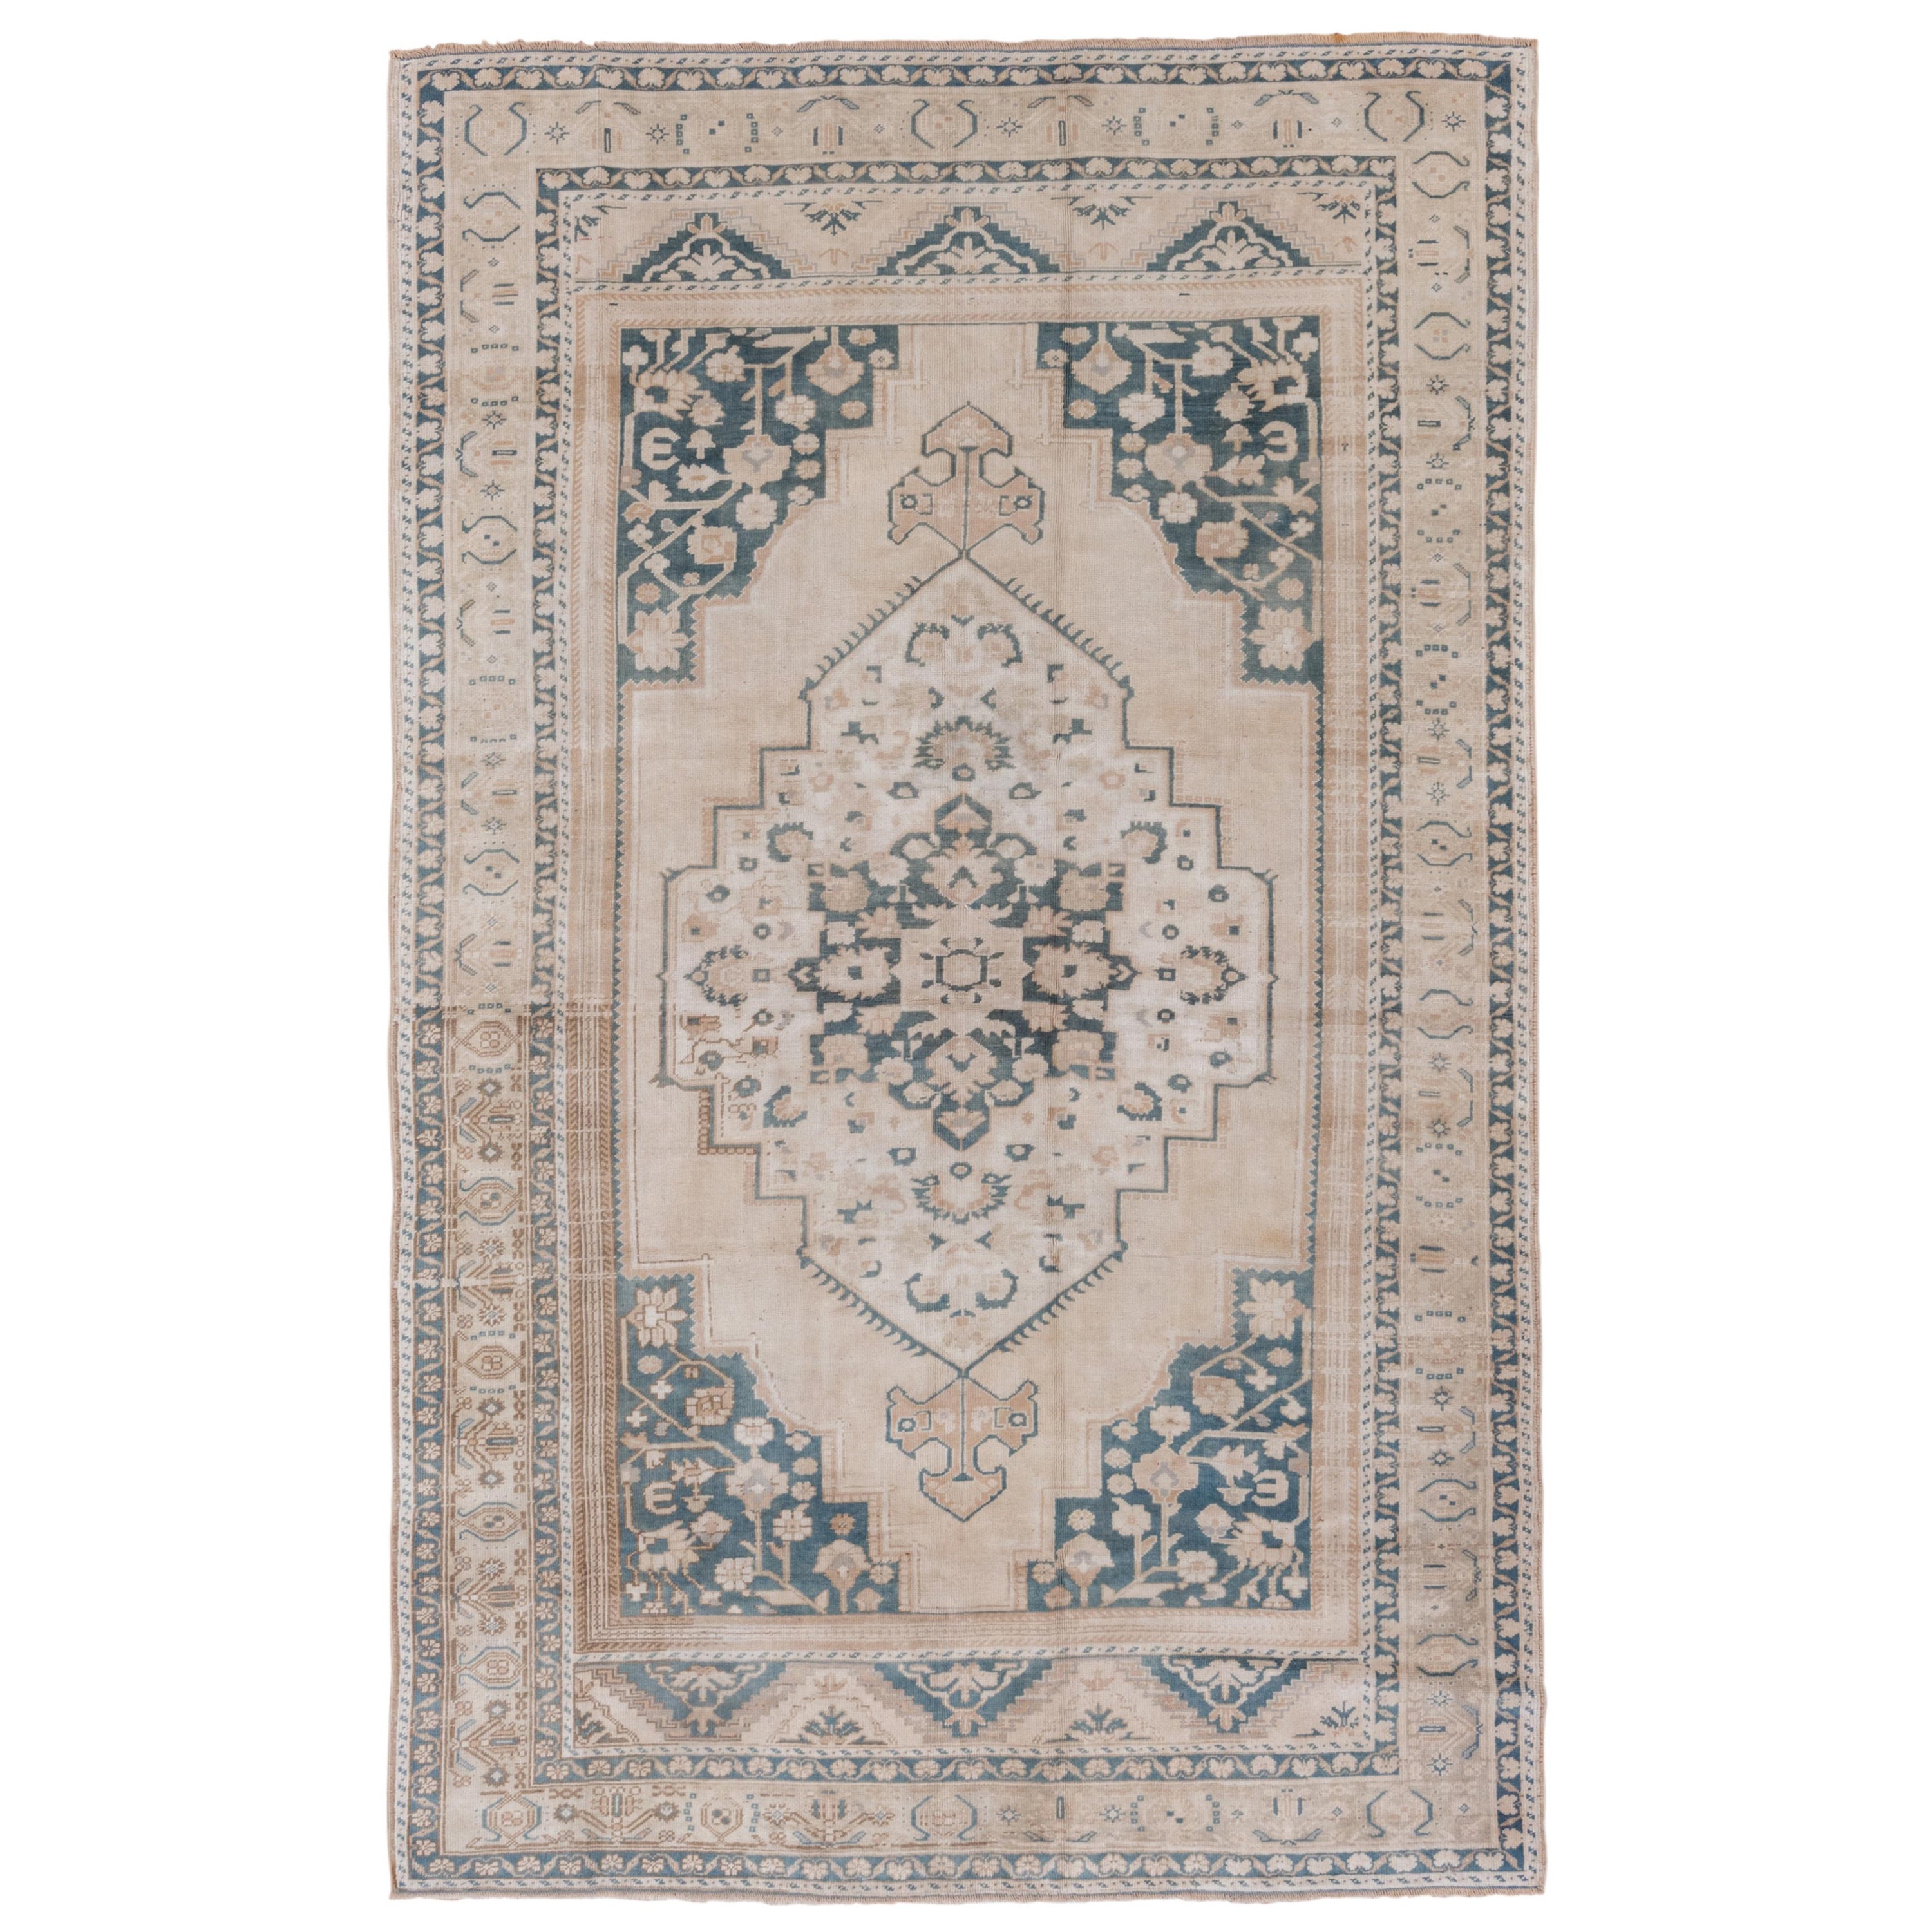 Vintage Handknotted Turkish Oushak Rug with a Neutral Palette and Green Accents